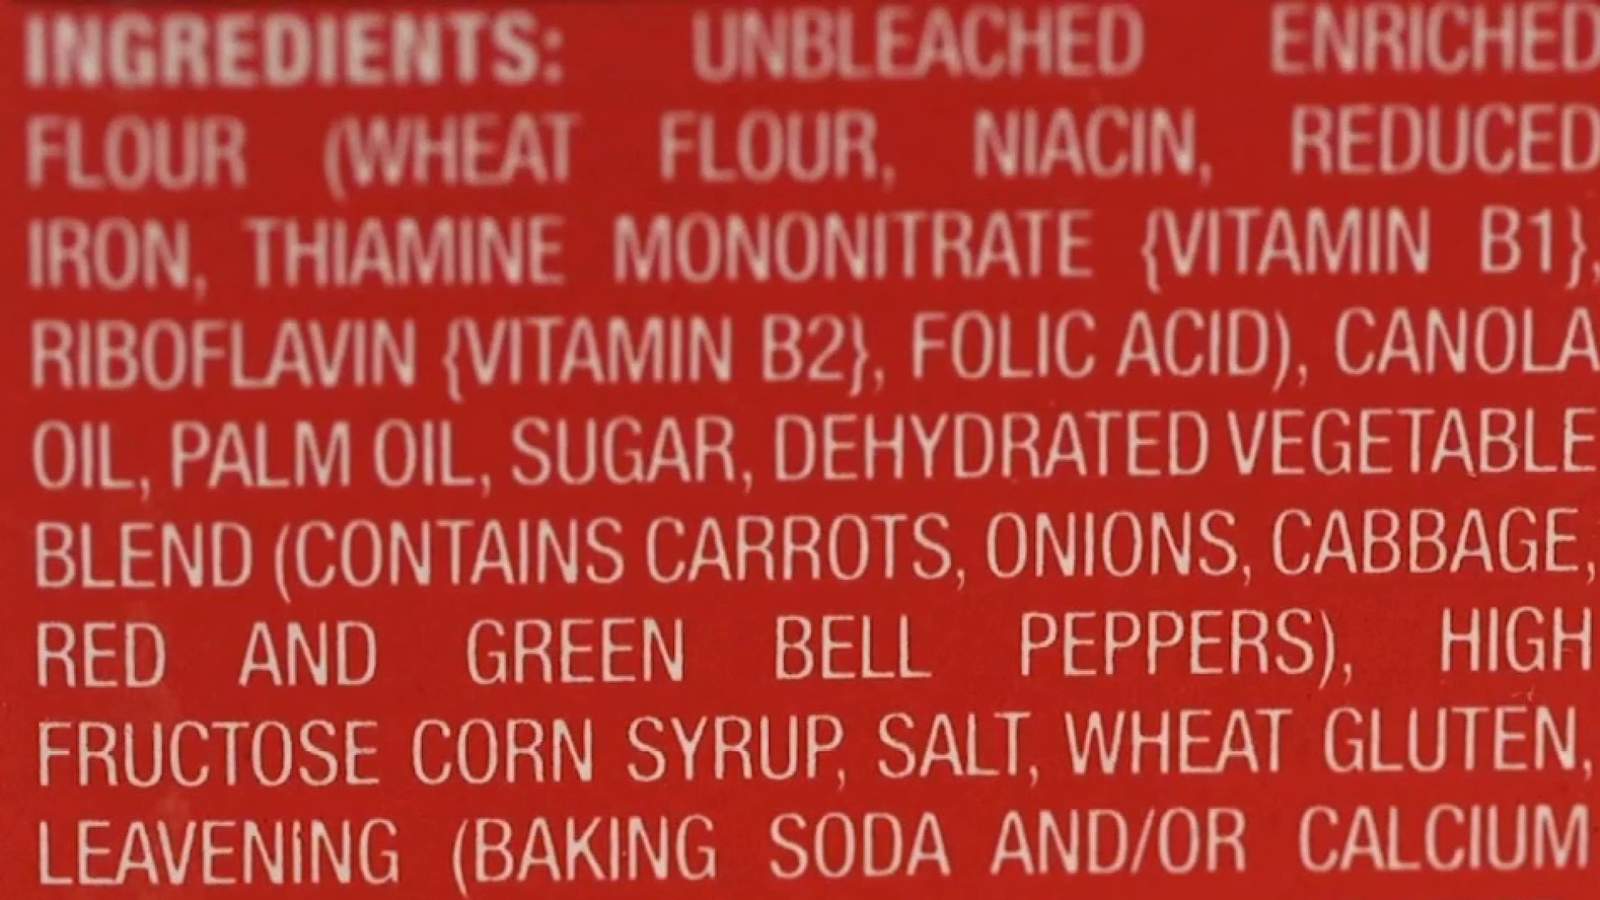 Consumer reports: Allergy warnings on food labels may not tell all